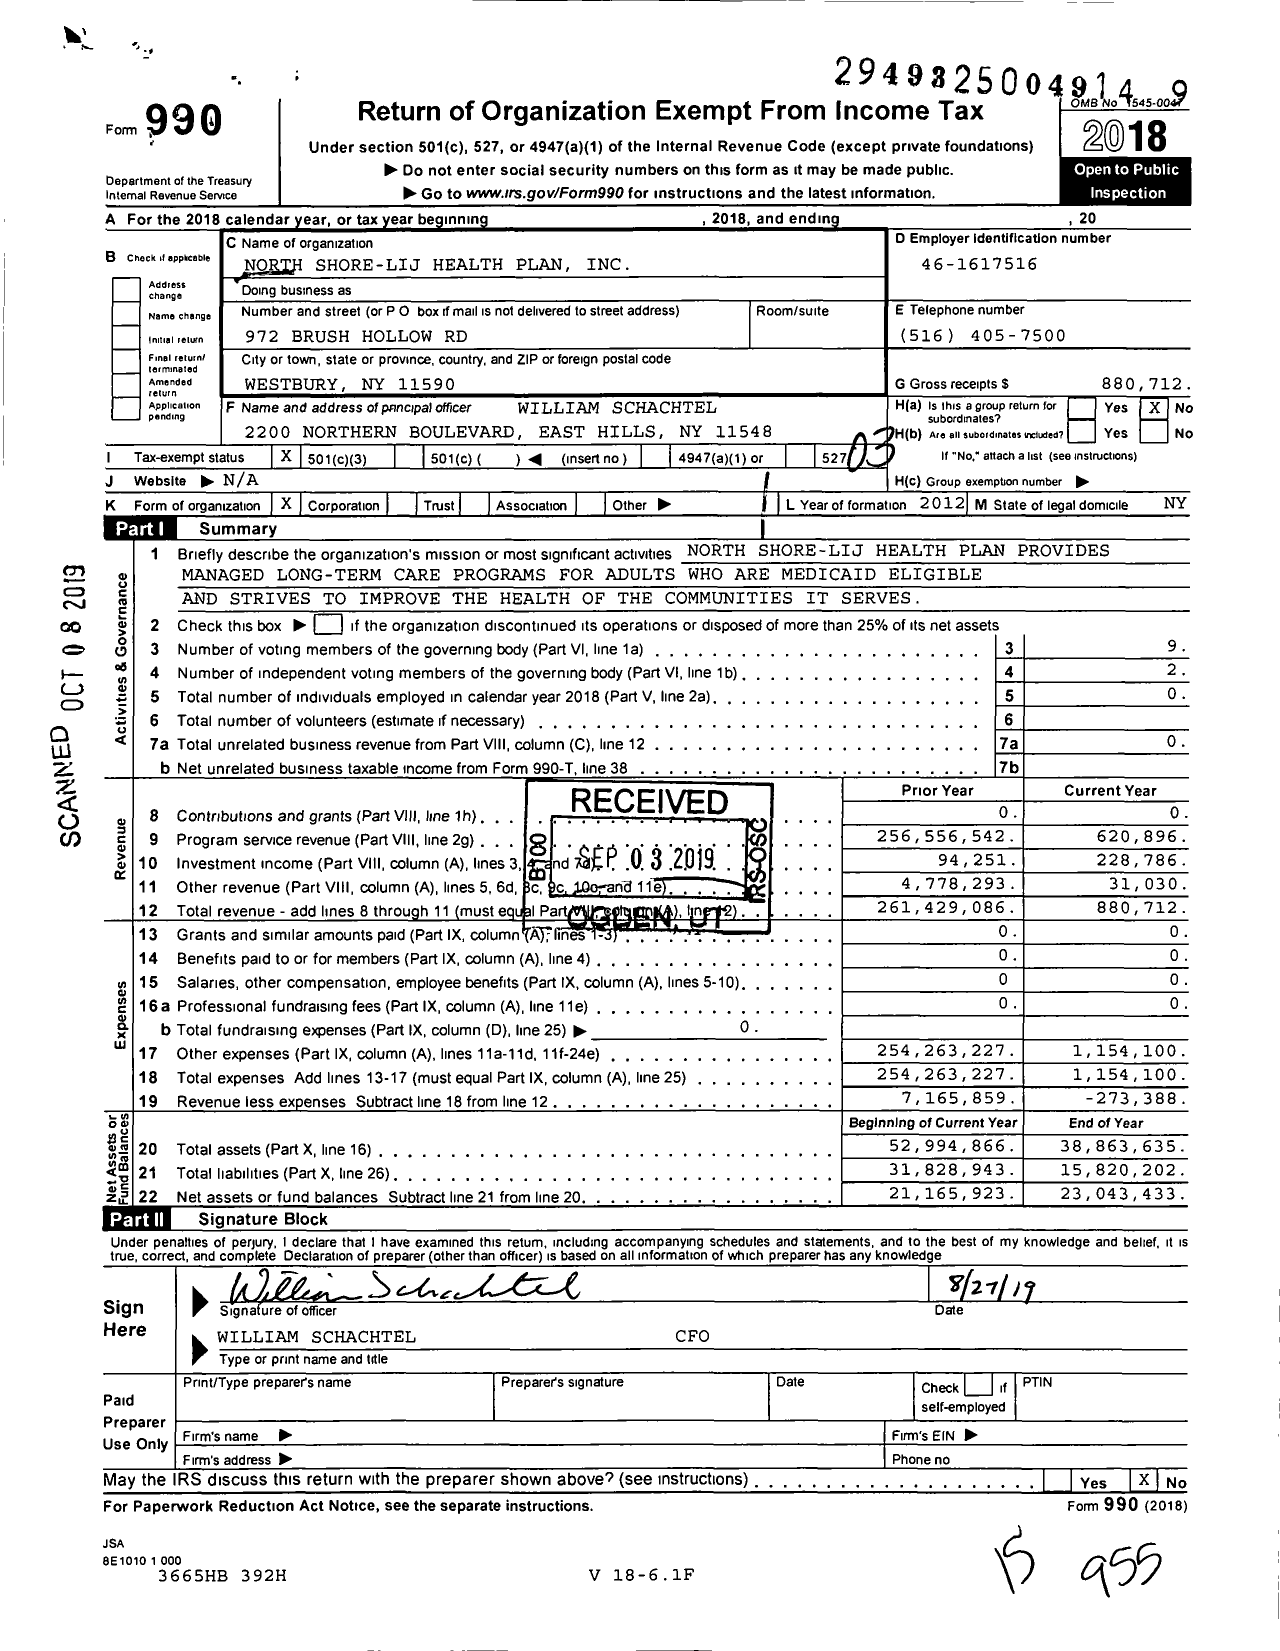 Image of first page of 2018 Form 990 for North Shore-Lij Health Plan